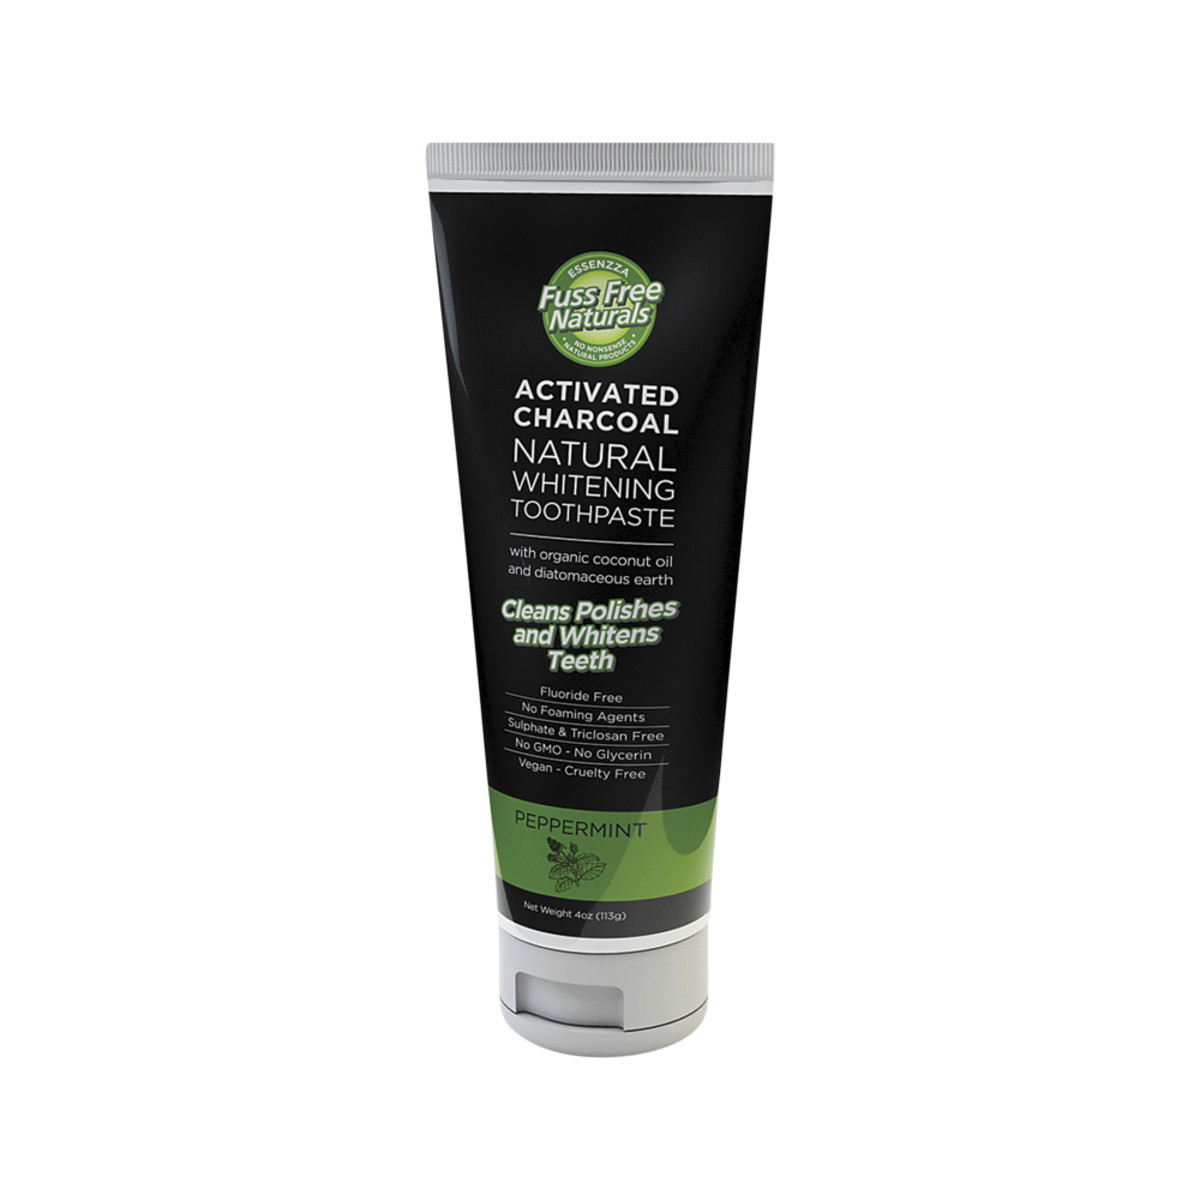 ESSENZZA FUSS FREE NATURALS - Activated Charcoal Toothpaste Peppermint